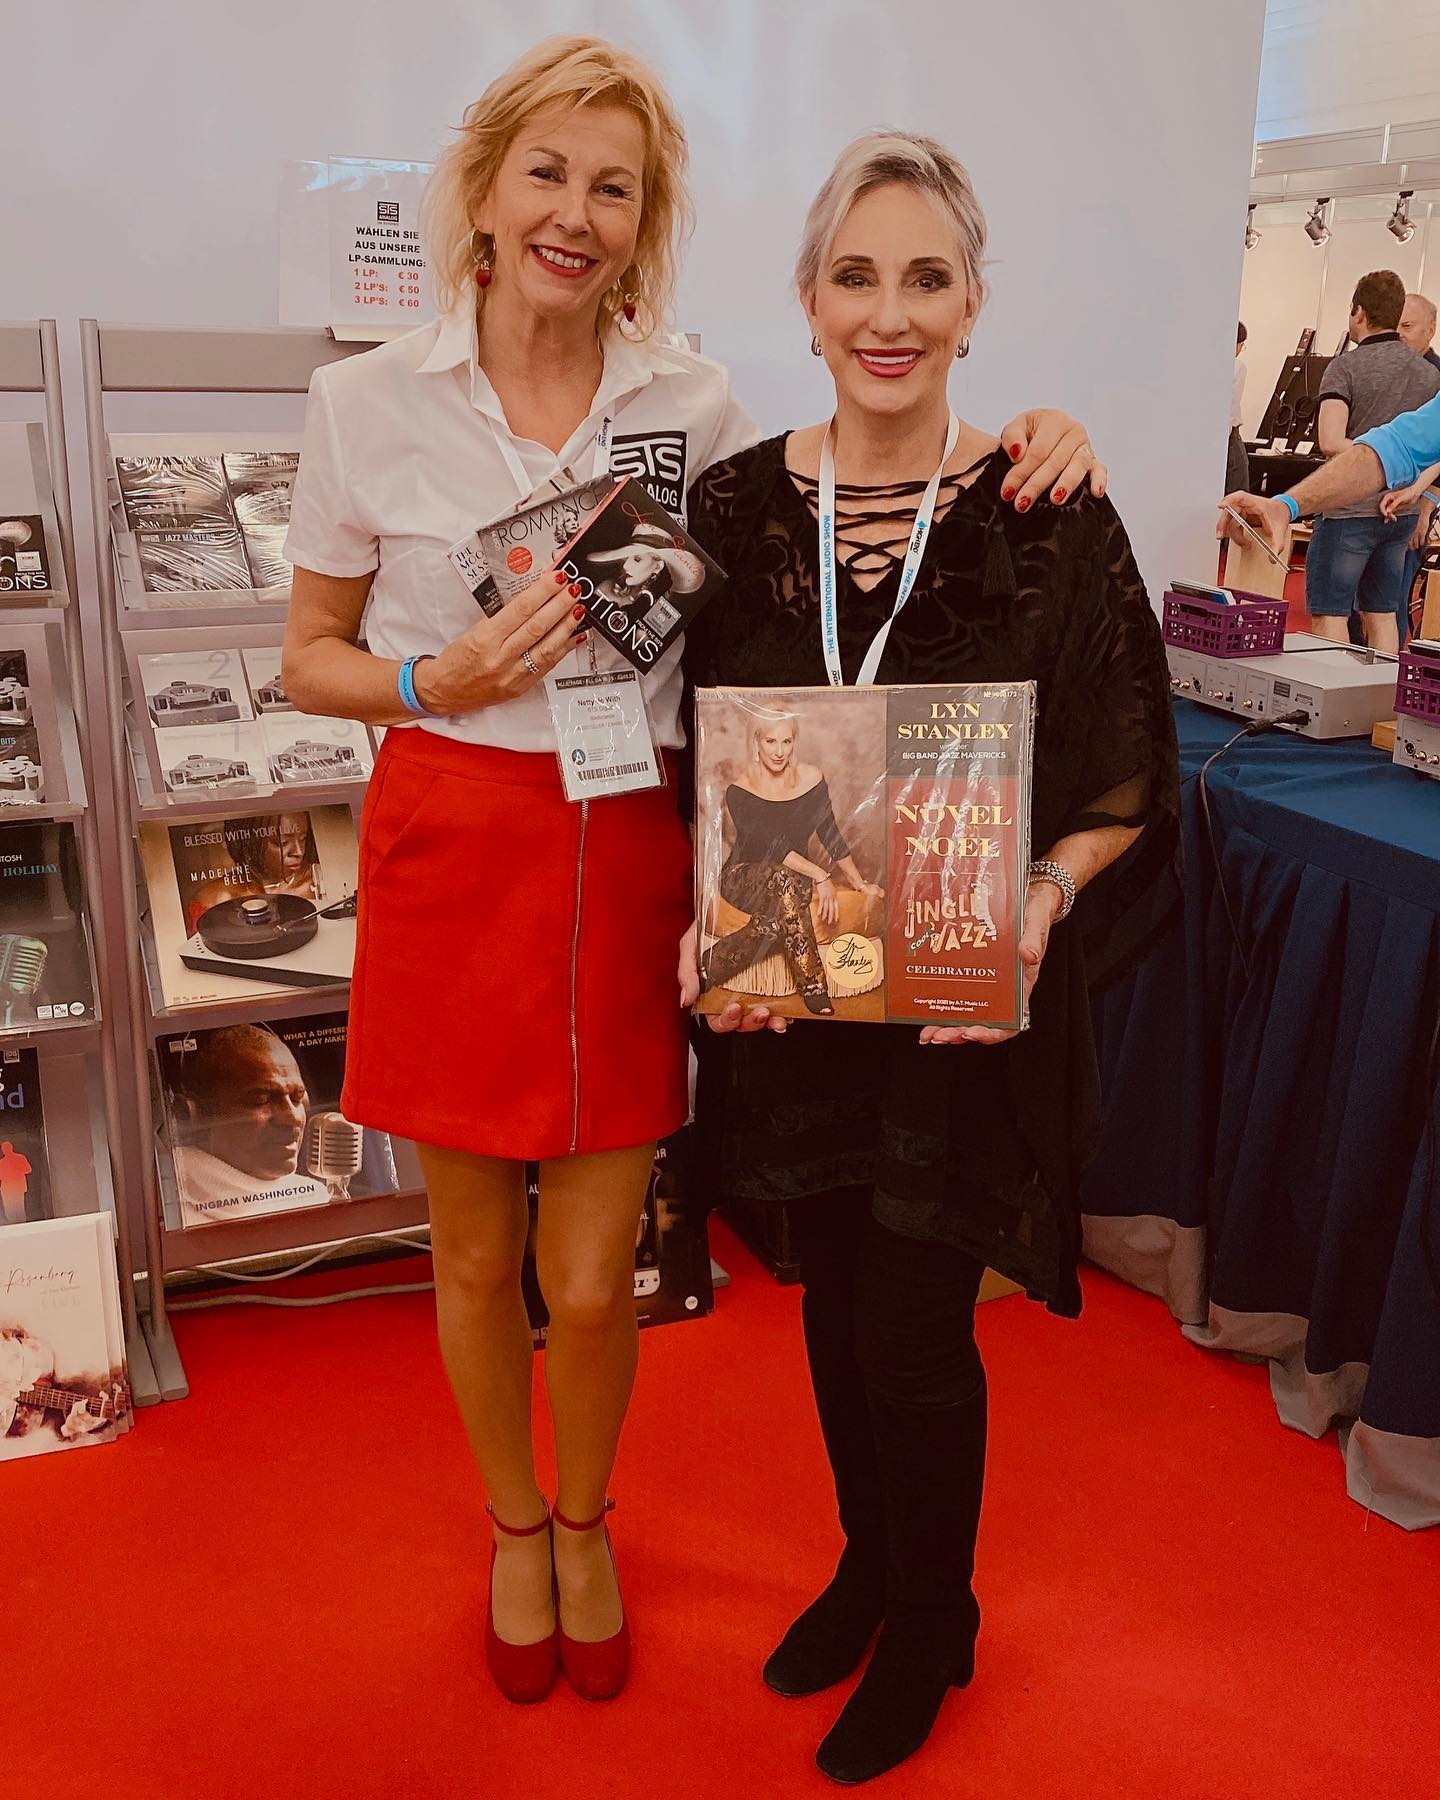 And here she is Lyn Stanley on our stand. You can buy here her wonderful LP’s/CD’s and USB stick now.
You can find our stand in hall 4 - stand V07

If you buy a LP/CD from her you can get a personal signature on it at 3 pm she will be on our stand 🤗